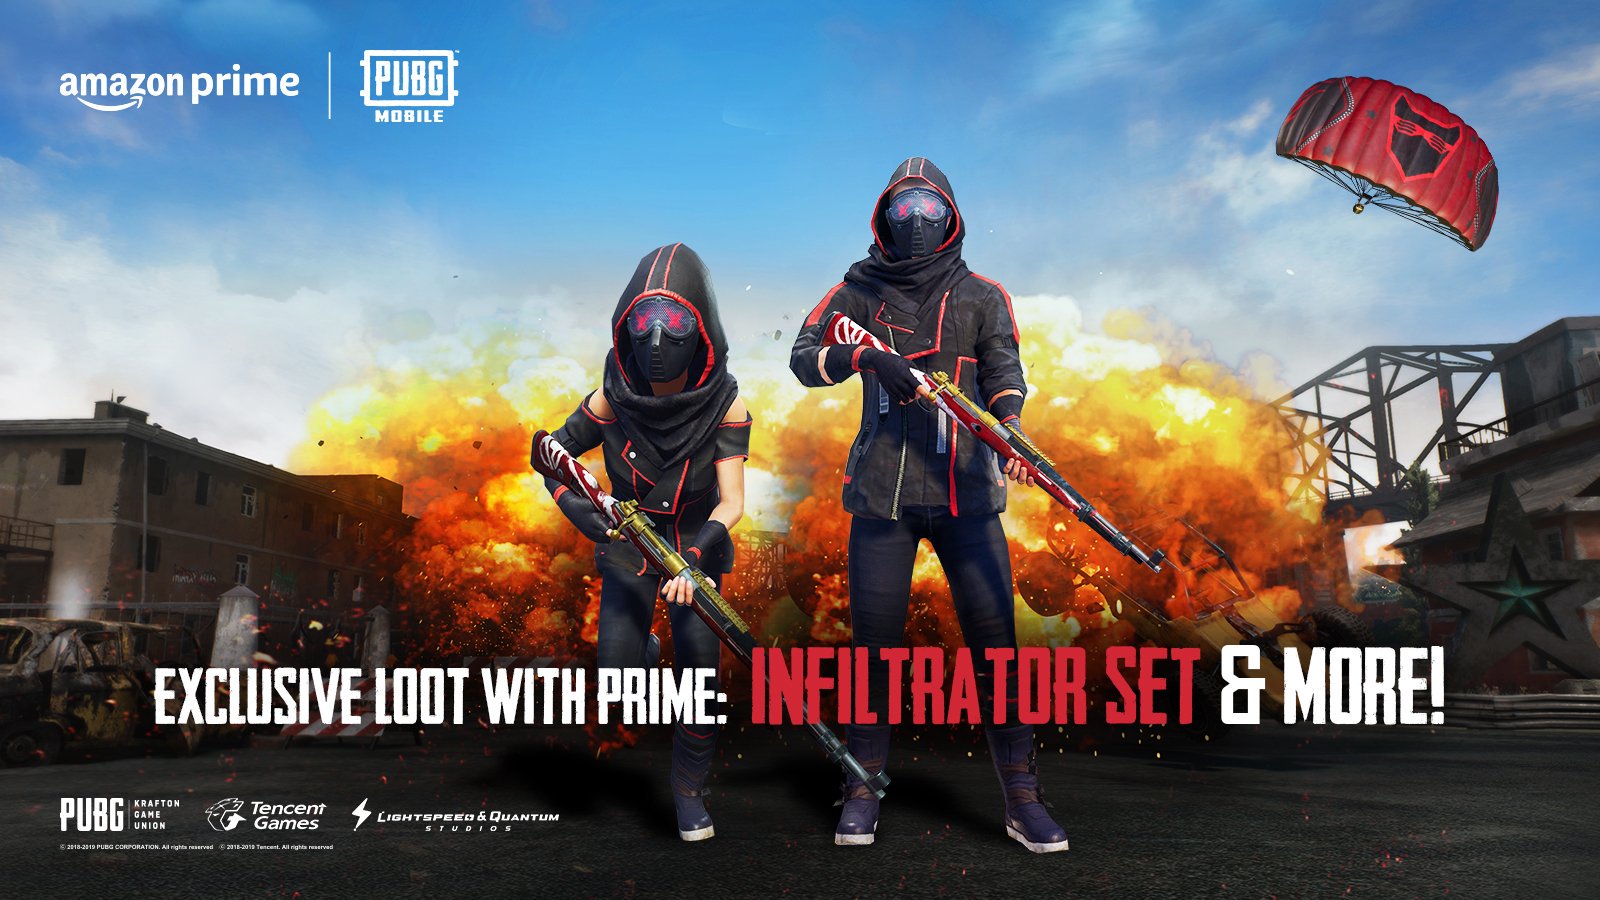 Pubg Mobile Teams Up With Amazon For Exclusive Twitch Prime Loot Dot Esports